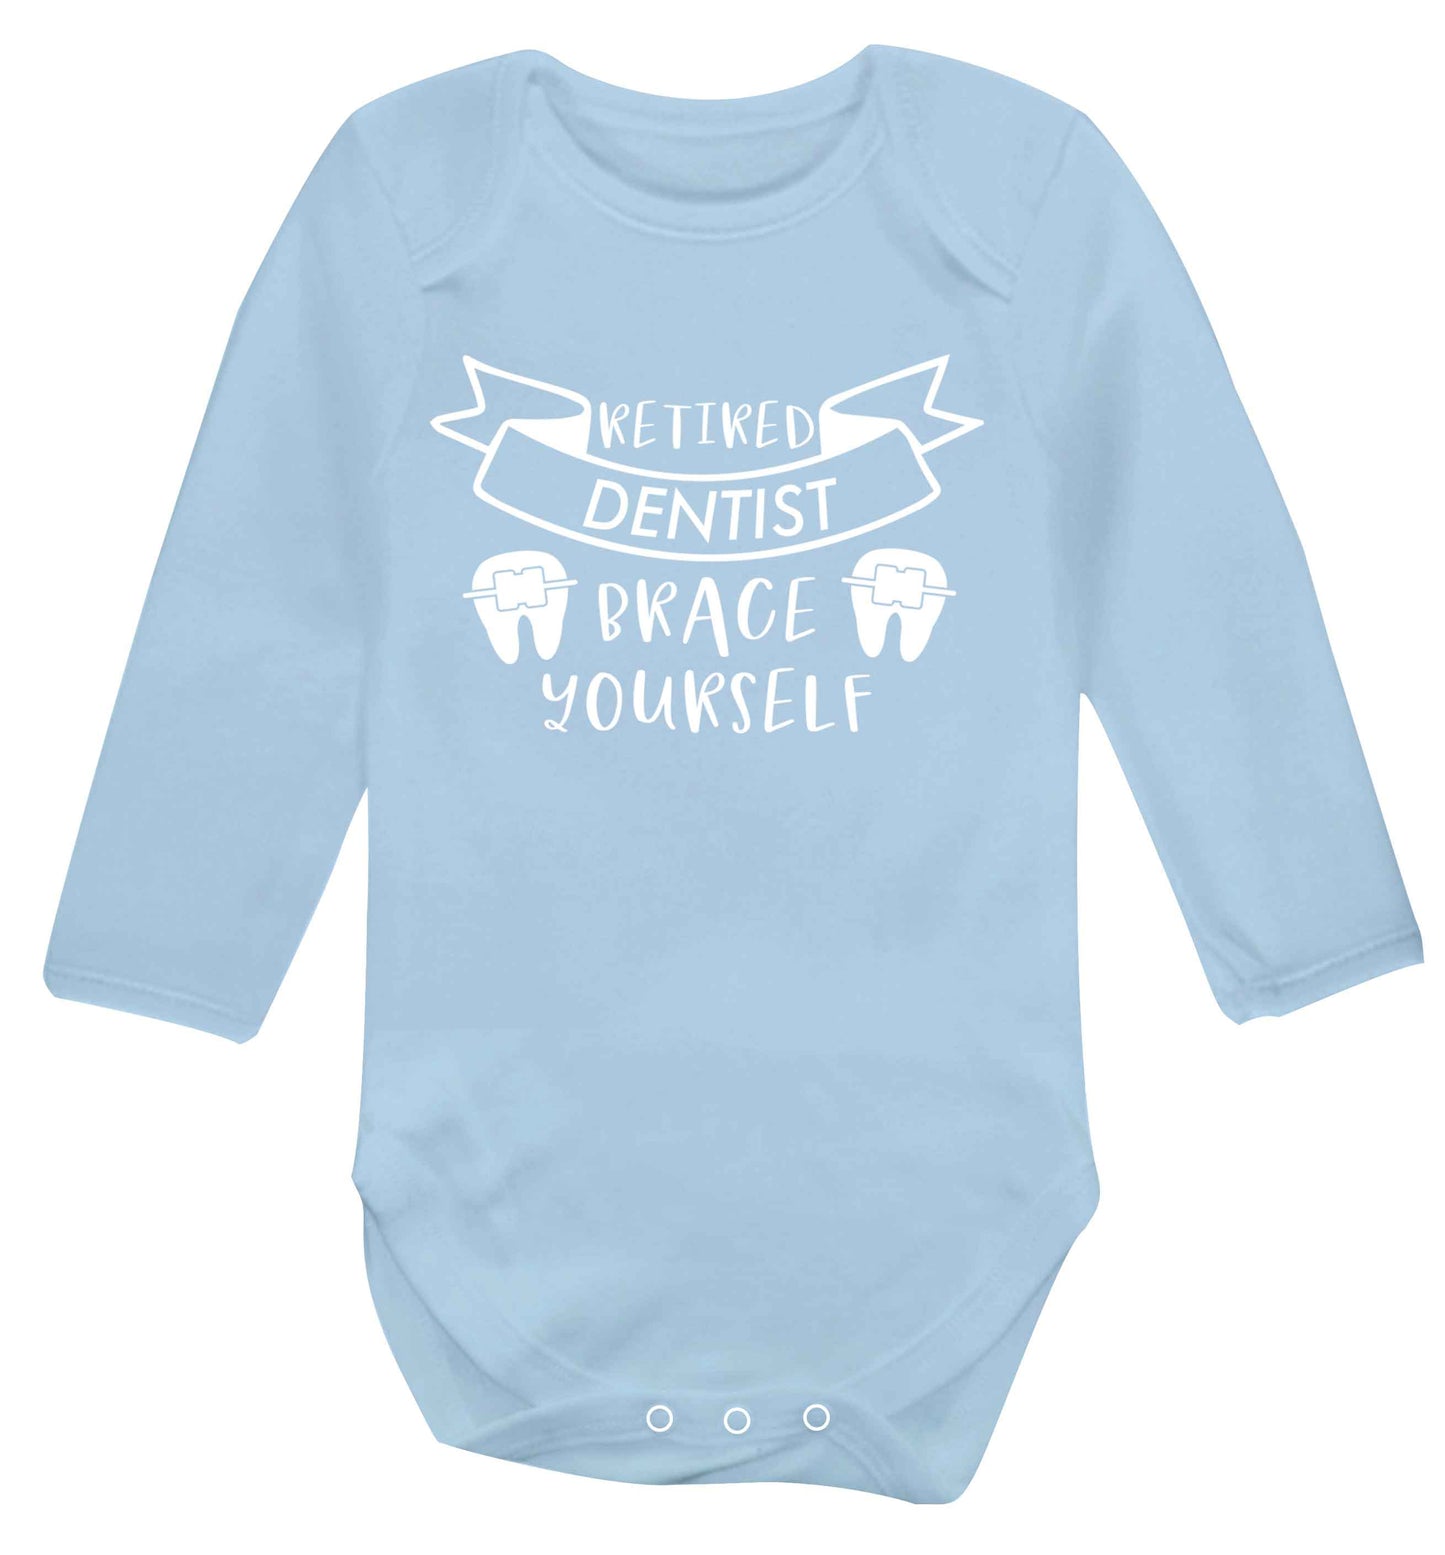 Retired dentist brace yourself Baby Vest long sleeved pale blue 6-12 months